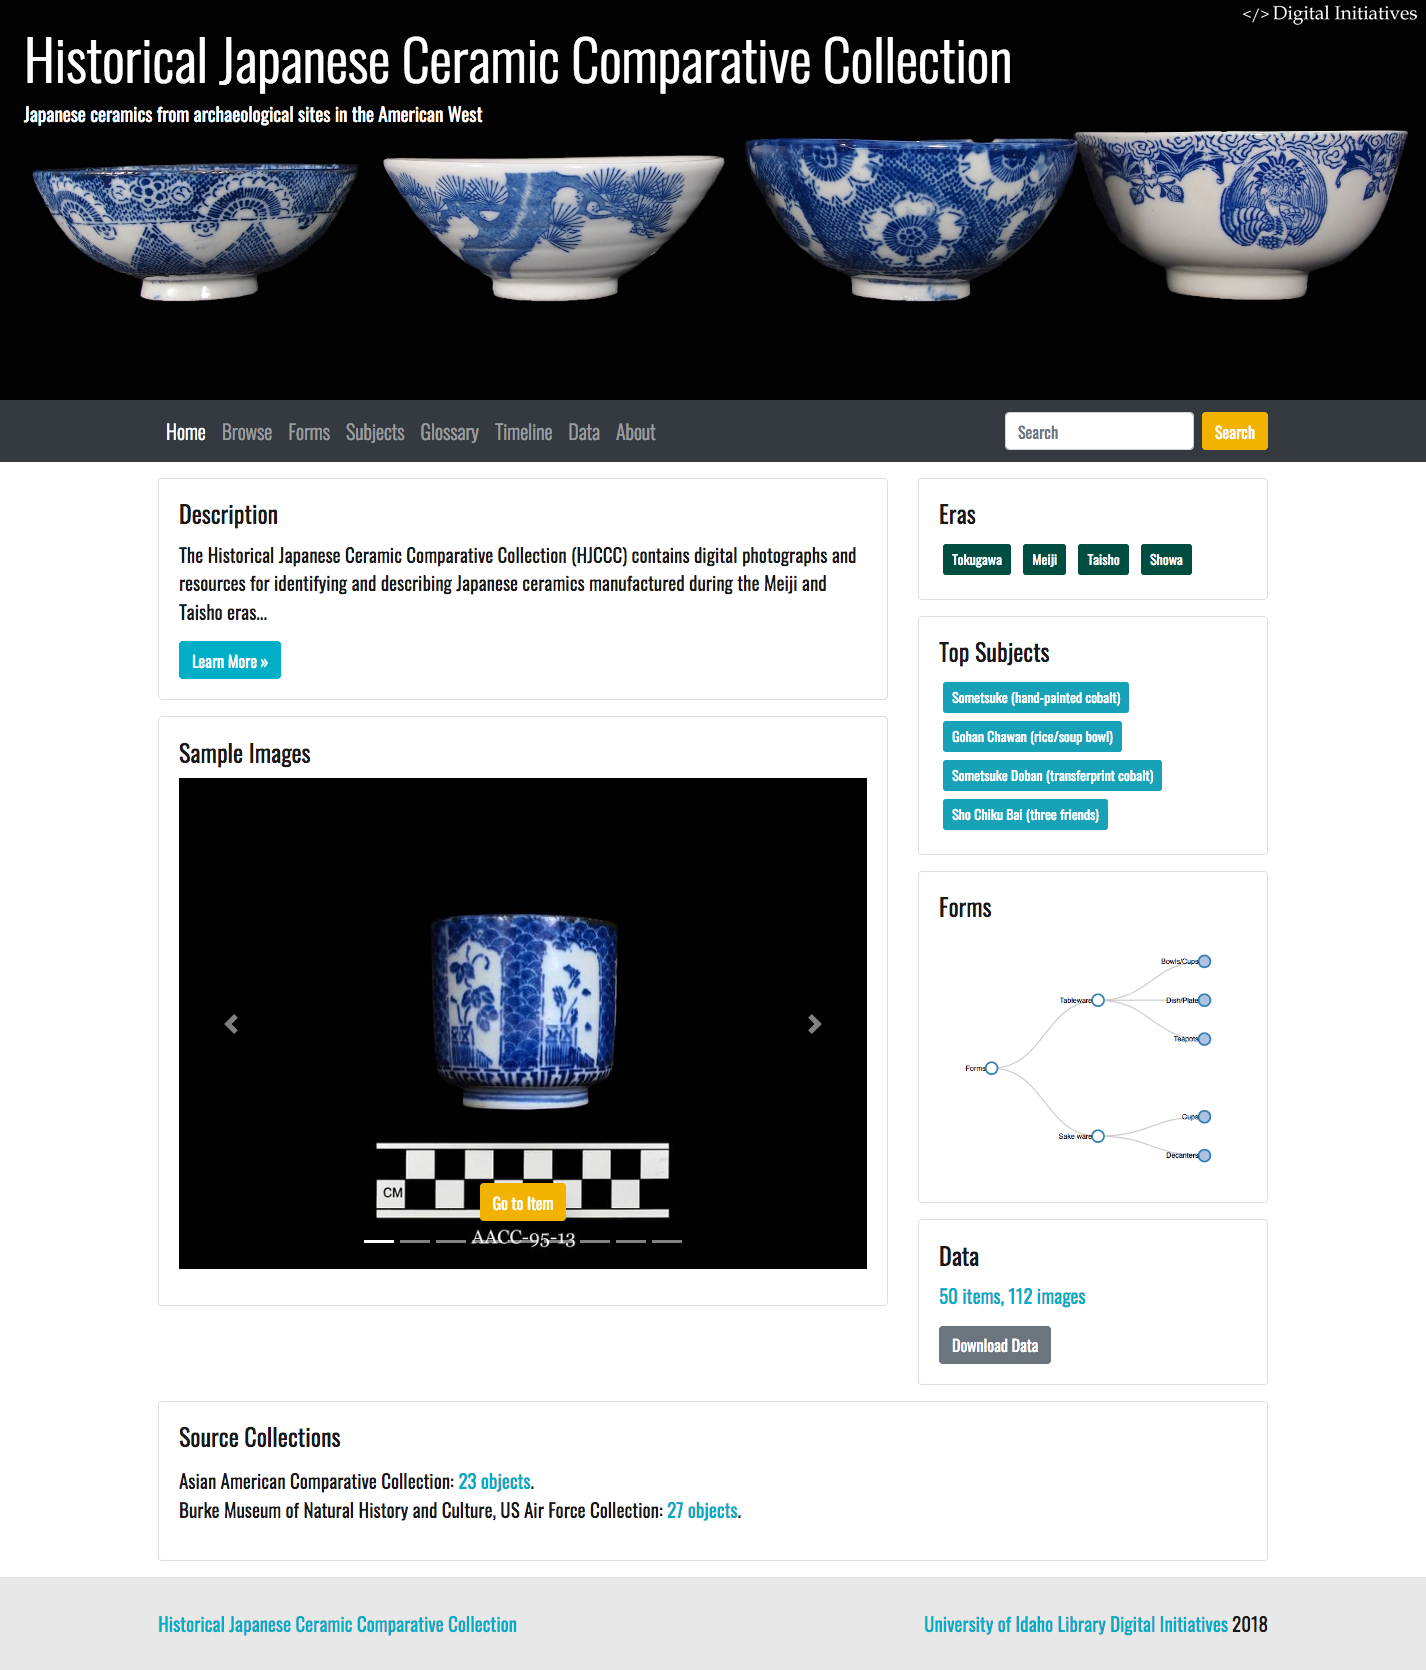 screen shot image of Historical Japanese Ceramic Comparative Collection home page